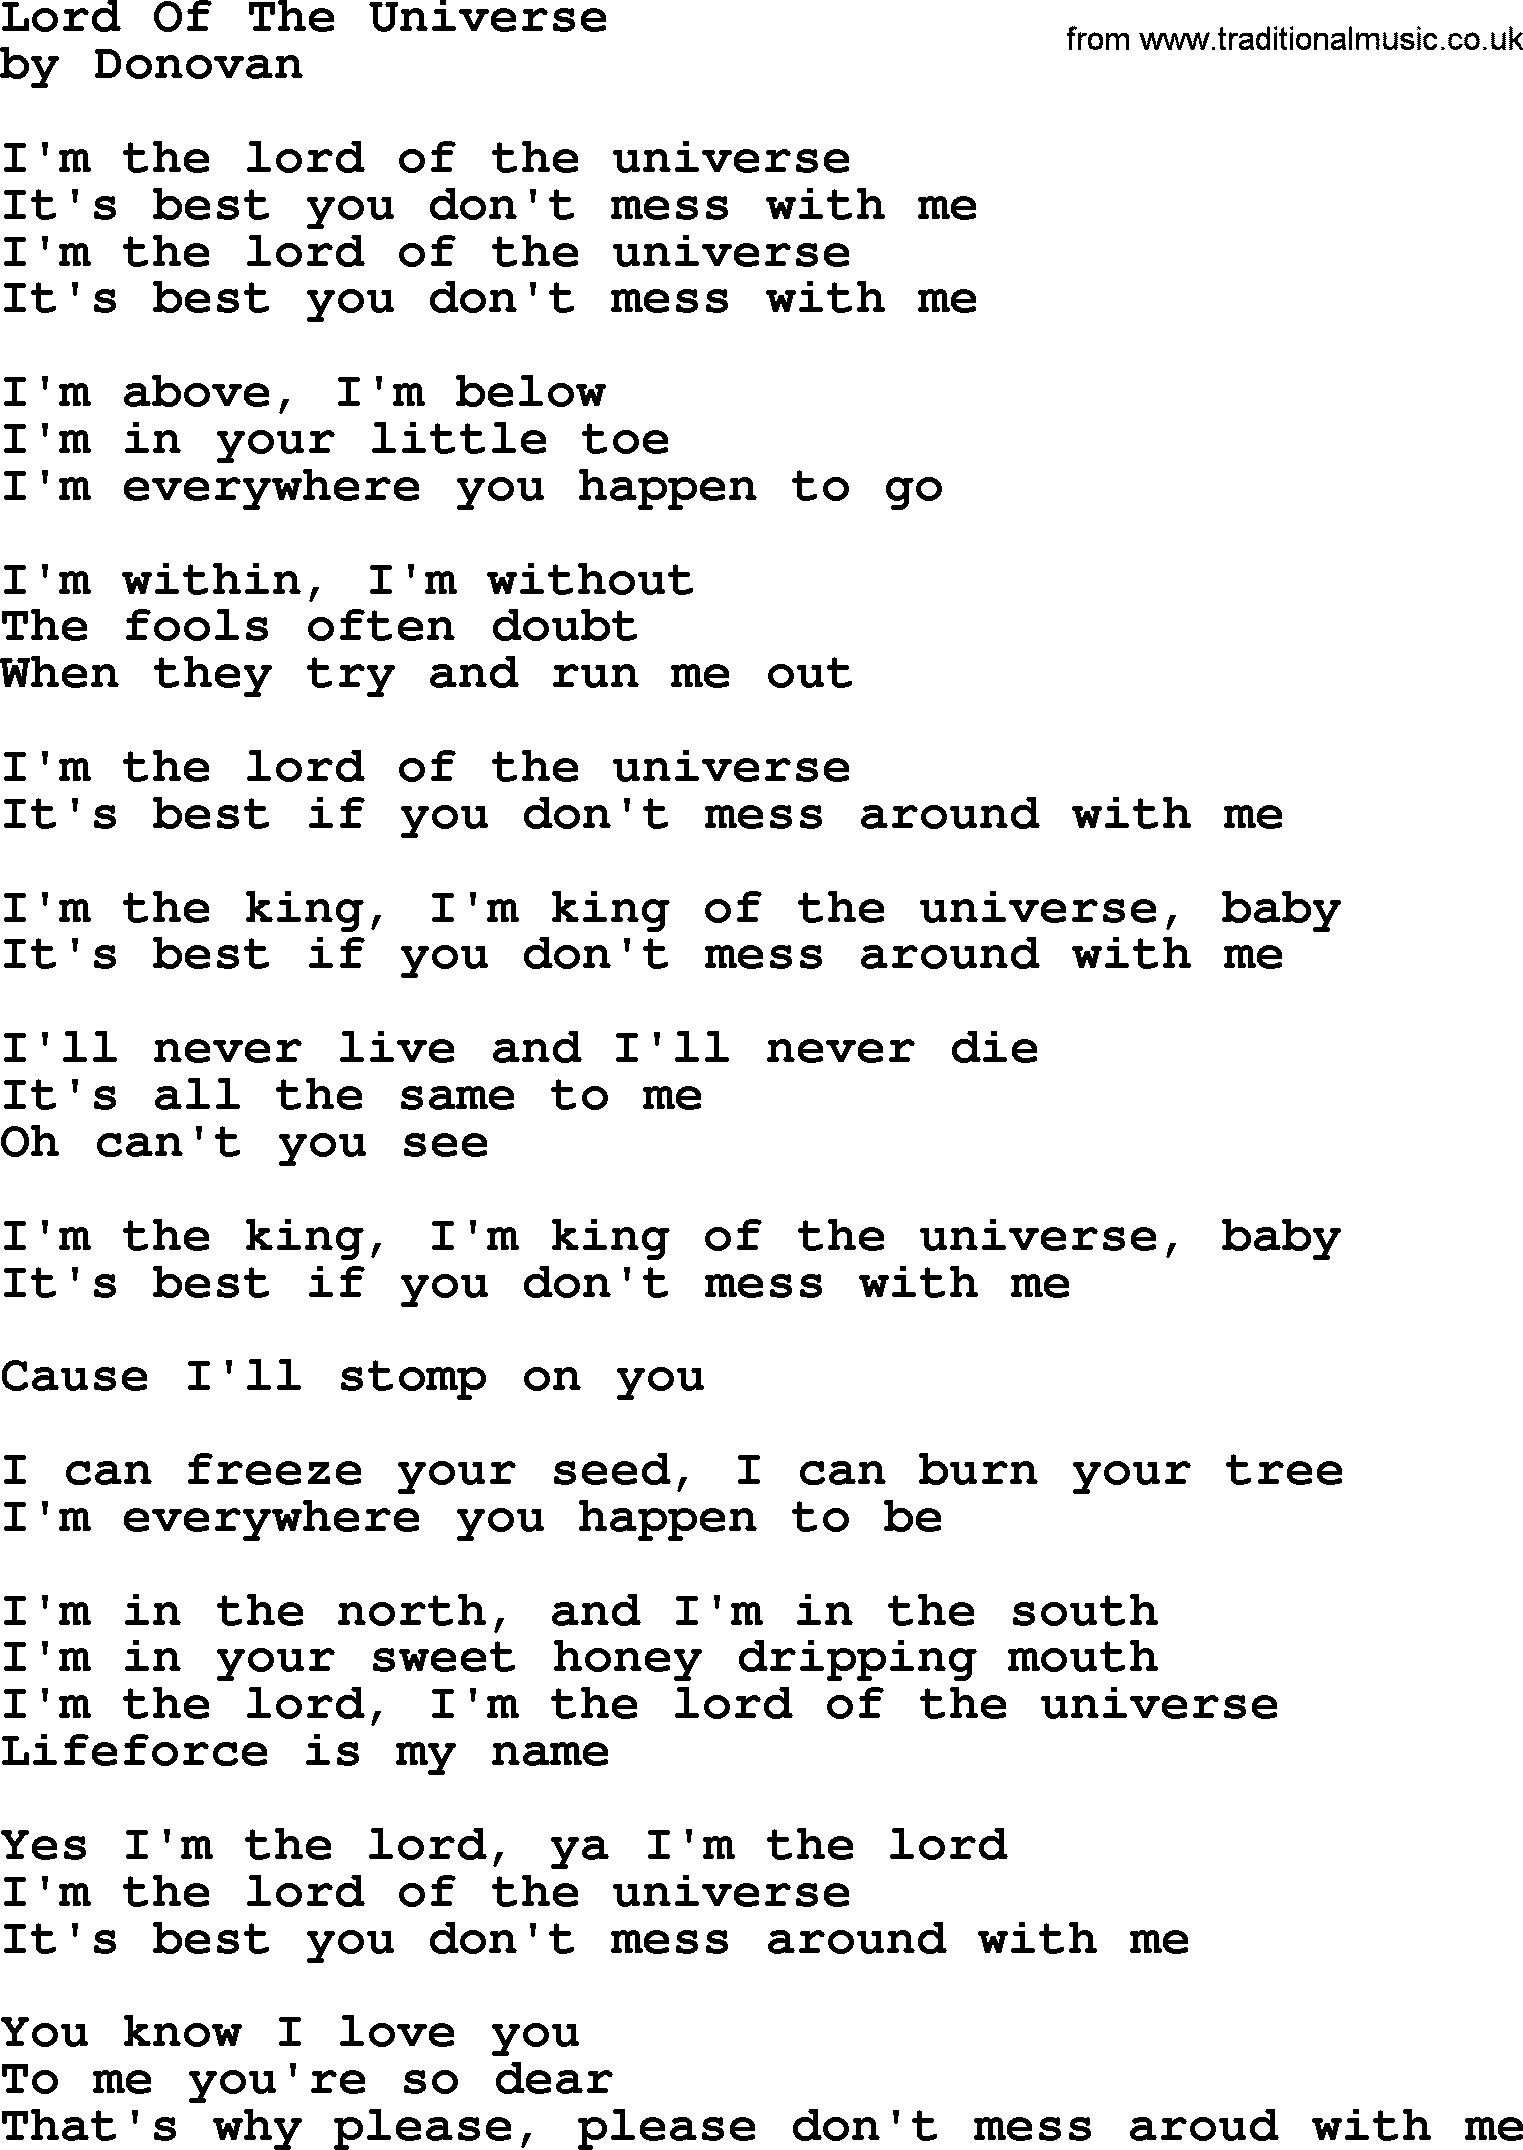 Donovan Leitch song: Lord Of The Universe lyrics